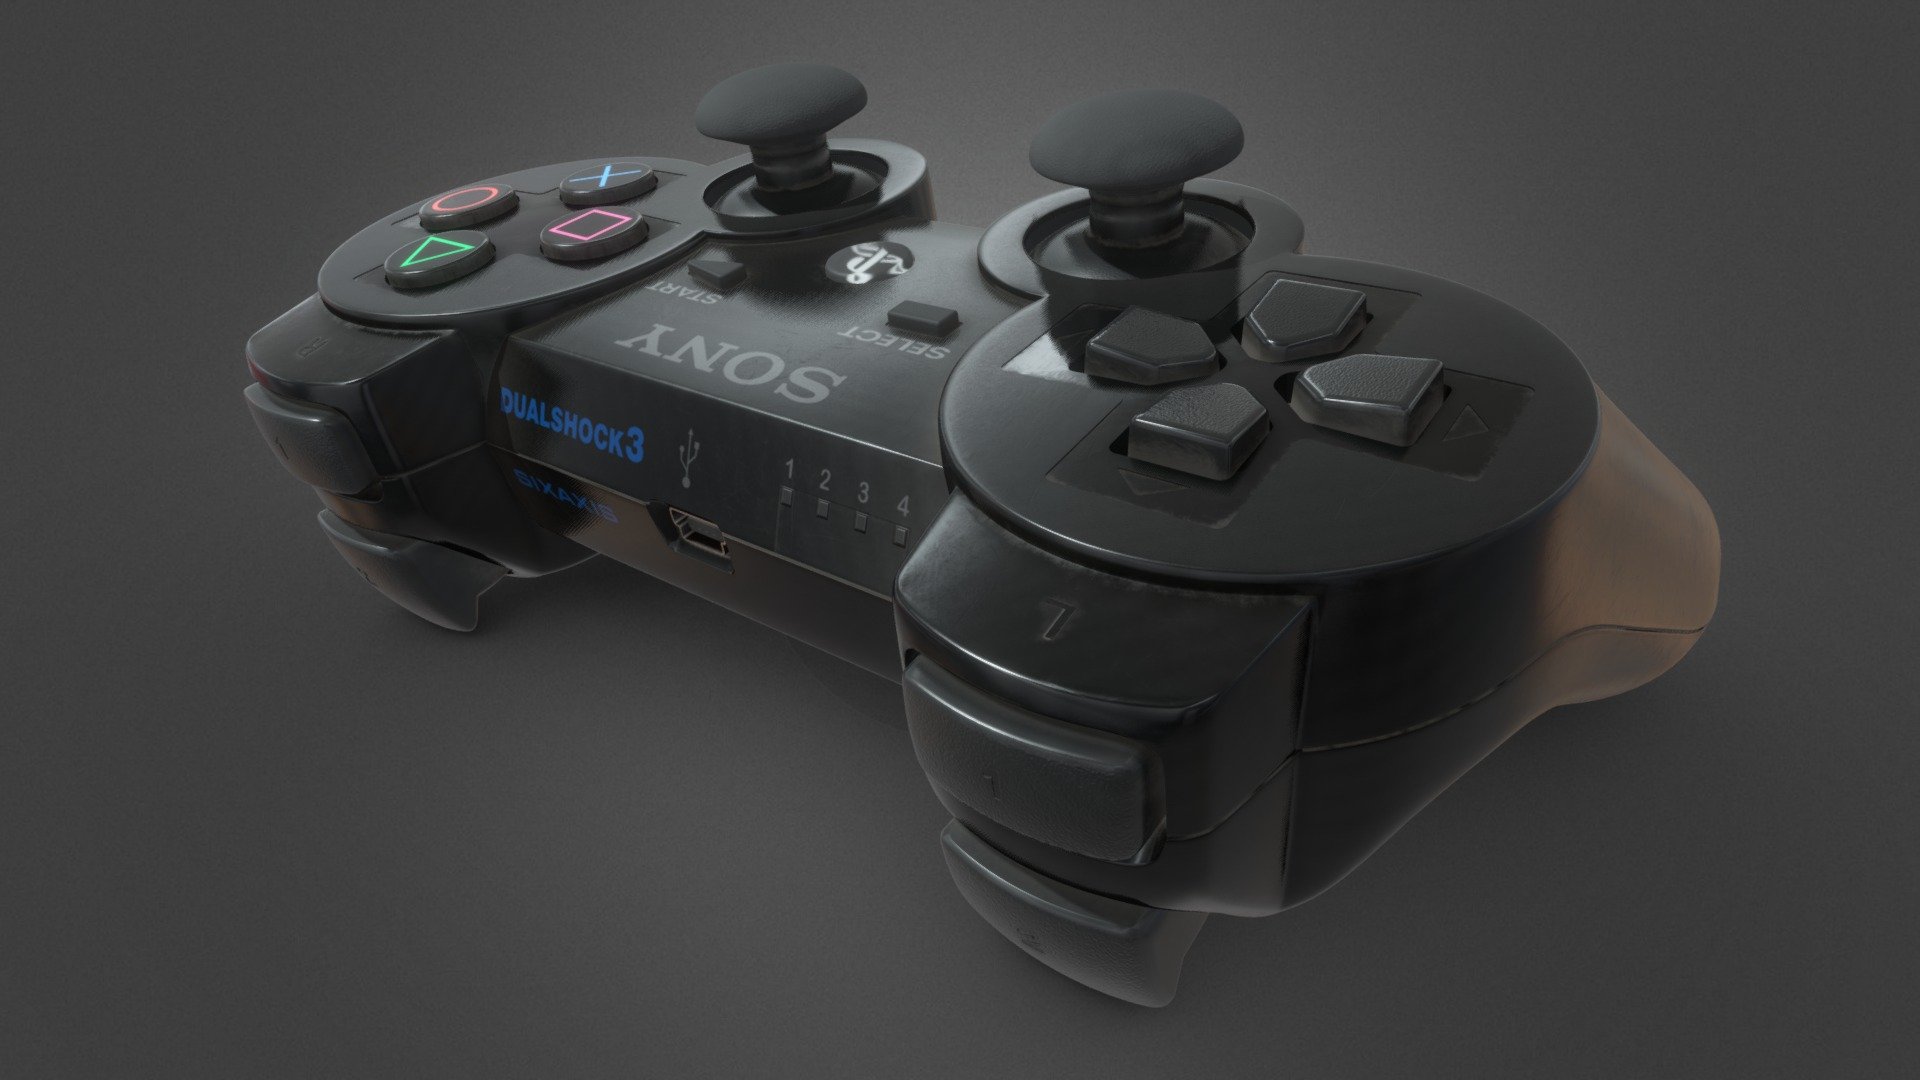 DUALSHOCK3 is a playstation 3 controller which is used to play game i created this model in blender with hardsurface polygon modeling method and texture in subtance 
this playstation 3 controller is the exact replica of my controller with the same amount of imperfection

render:
 - DUALSHOCK 3 controller - 3D model by uday (@udayjeet) 3d model